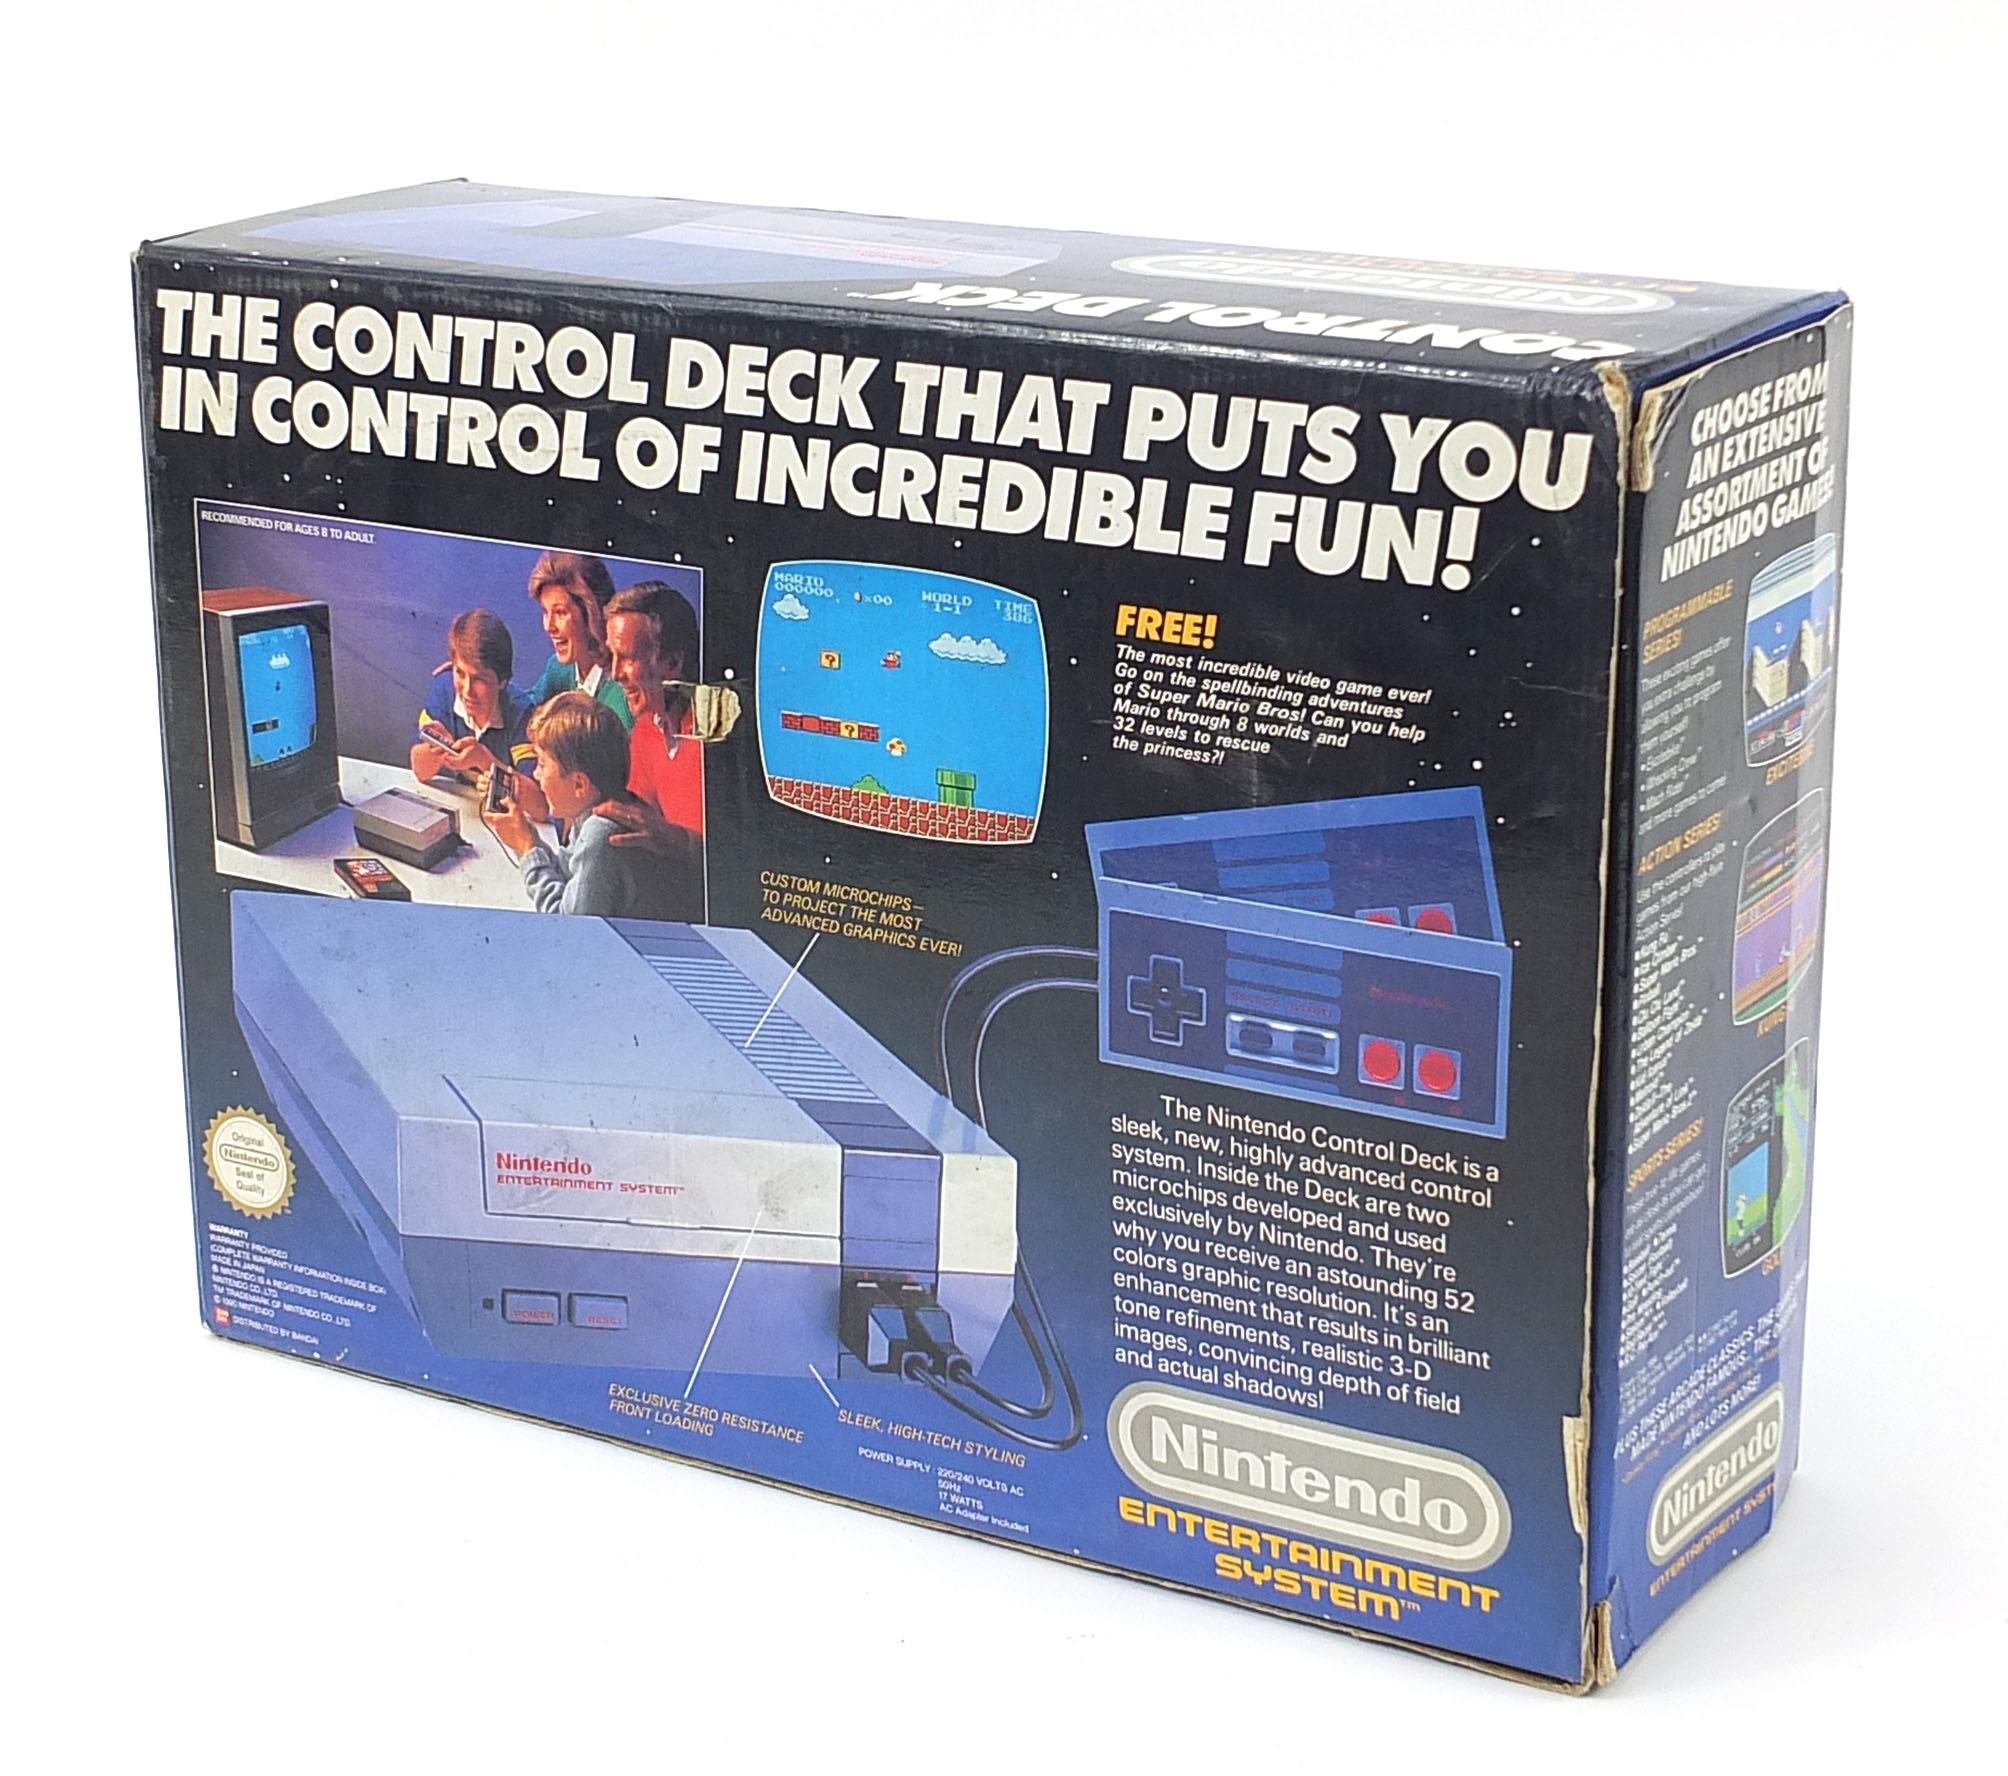 Nintendo control deck entertainment system with box - Image 6 of 7